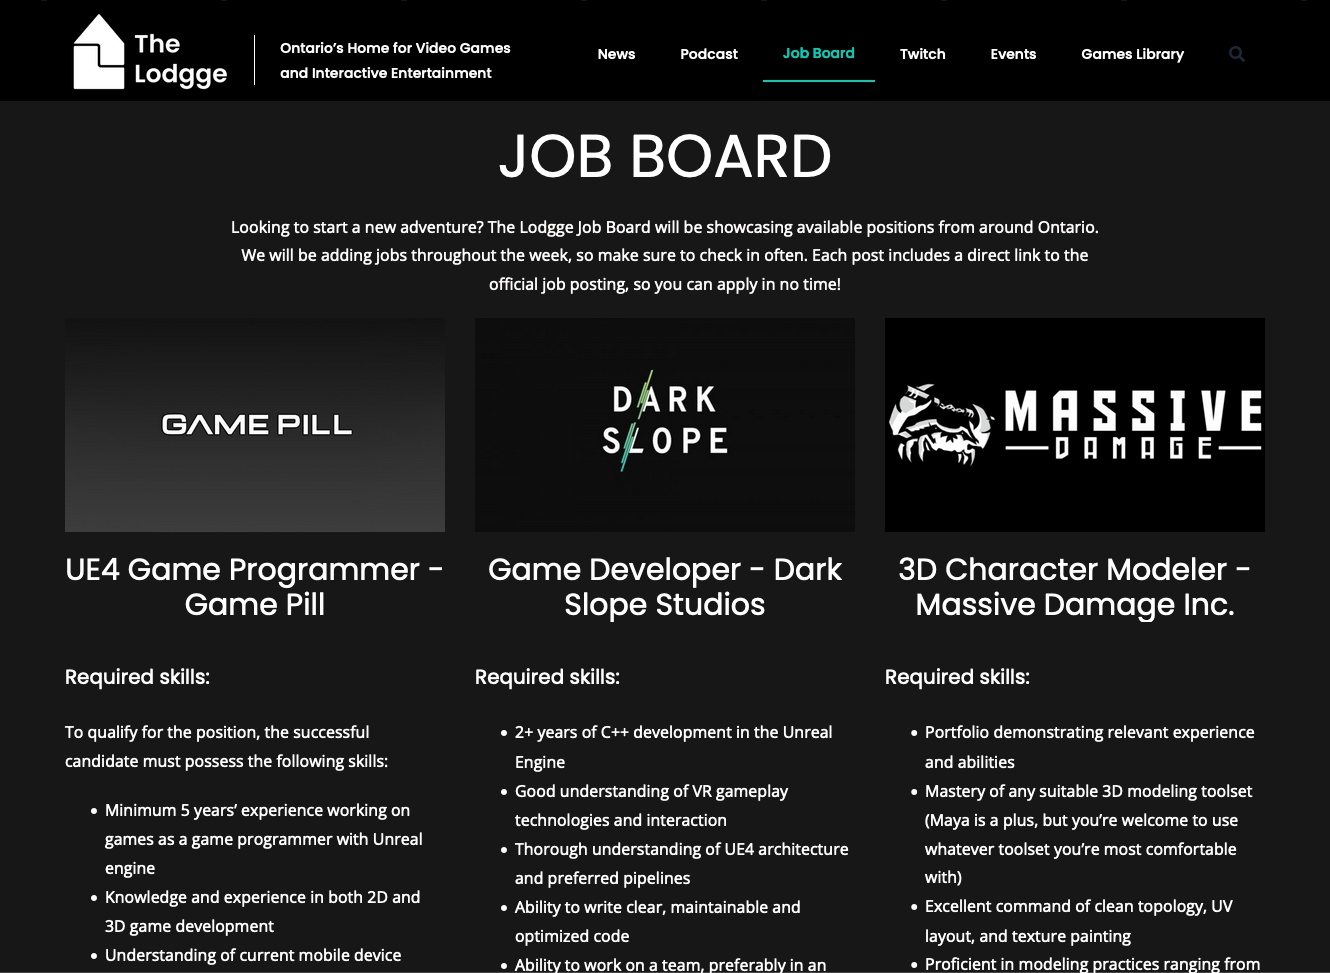 Image of the job board on TheLodgge.com